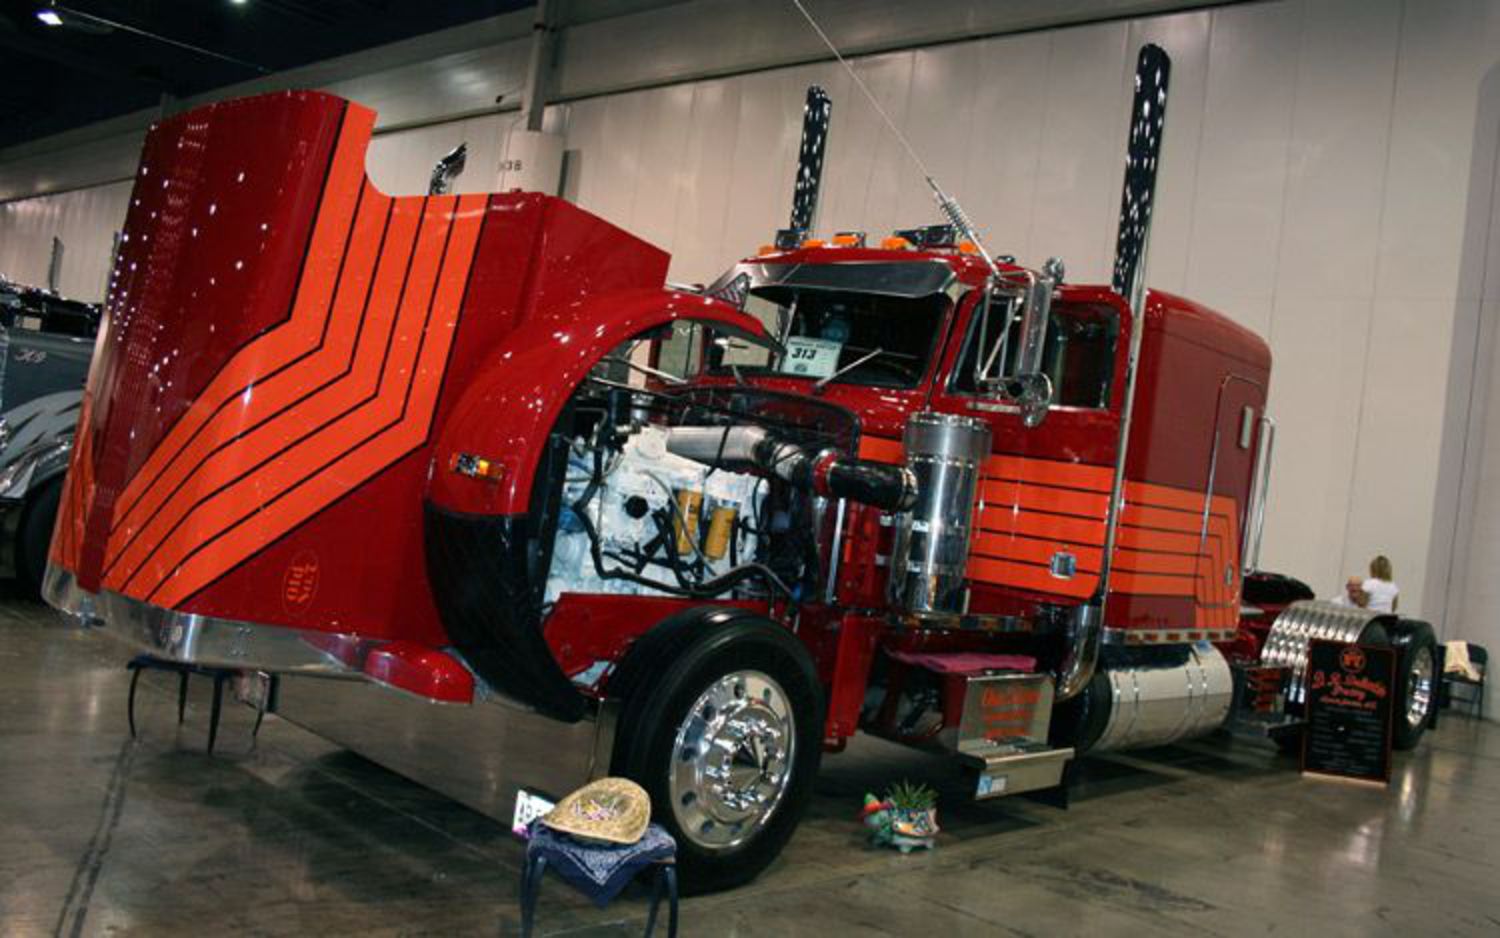 Peterbilt 357-111 Photo Gallery: Photo #11 out of 9, Image Size ...